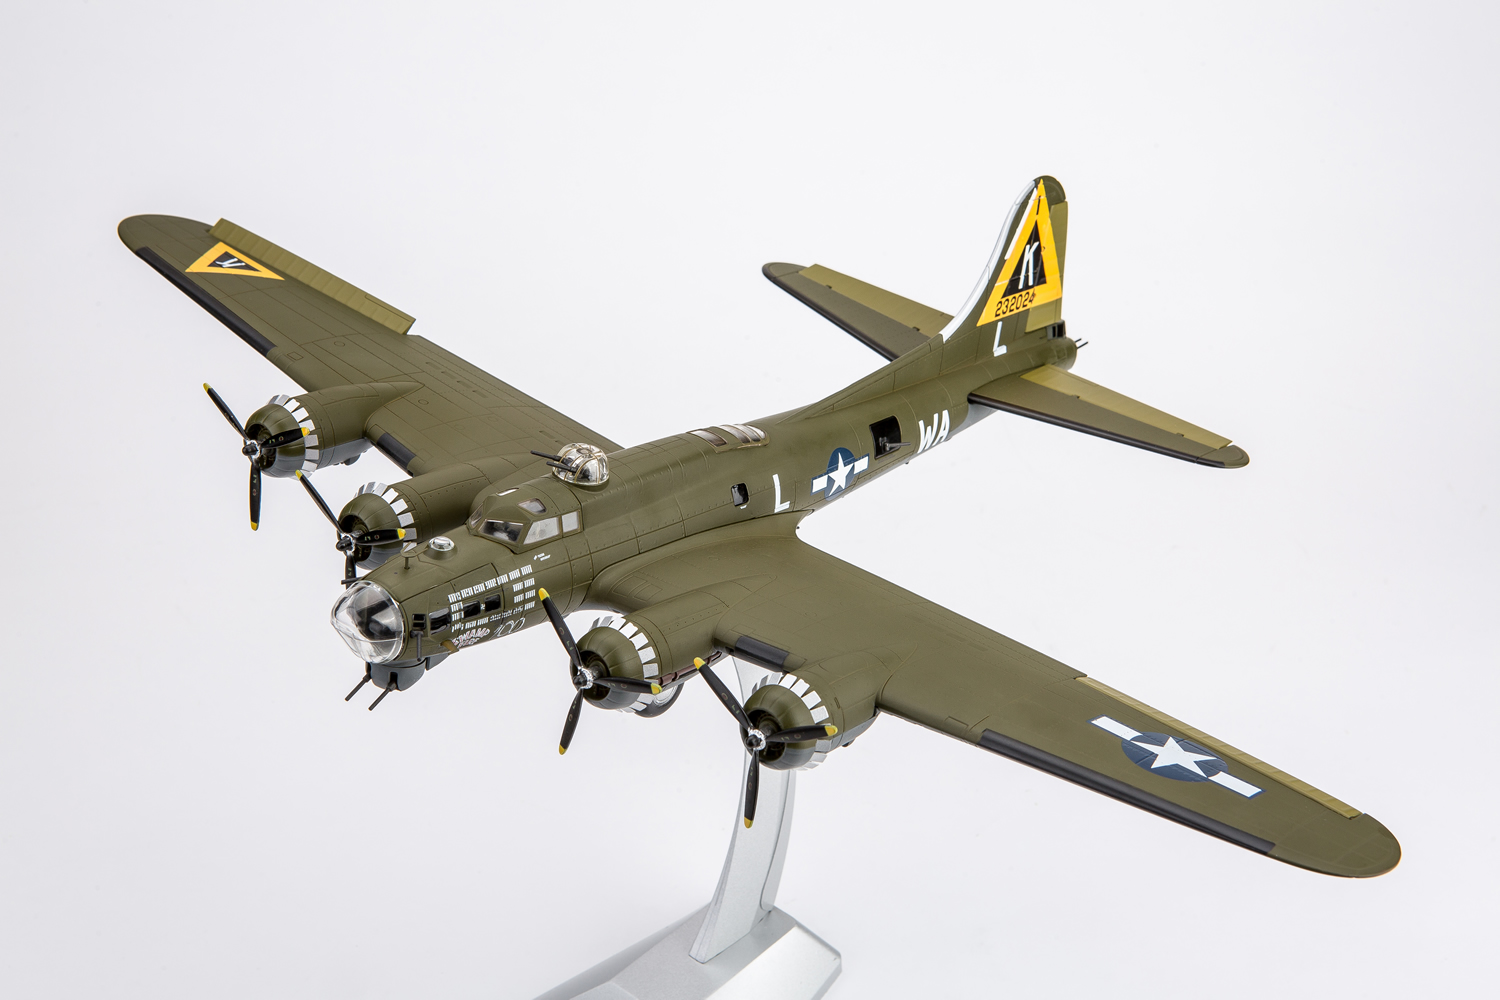 Boeing B 17 Flying Fortress Airplane Models Aircraft Models Images